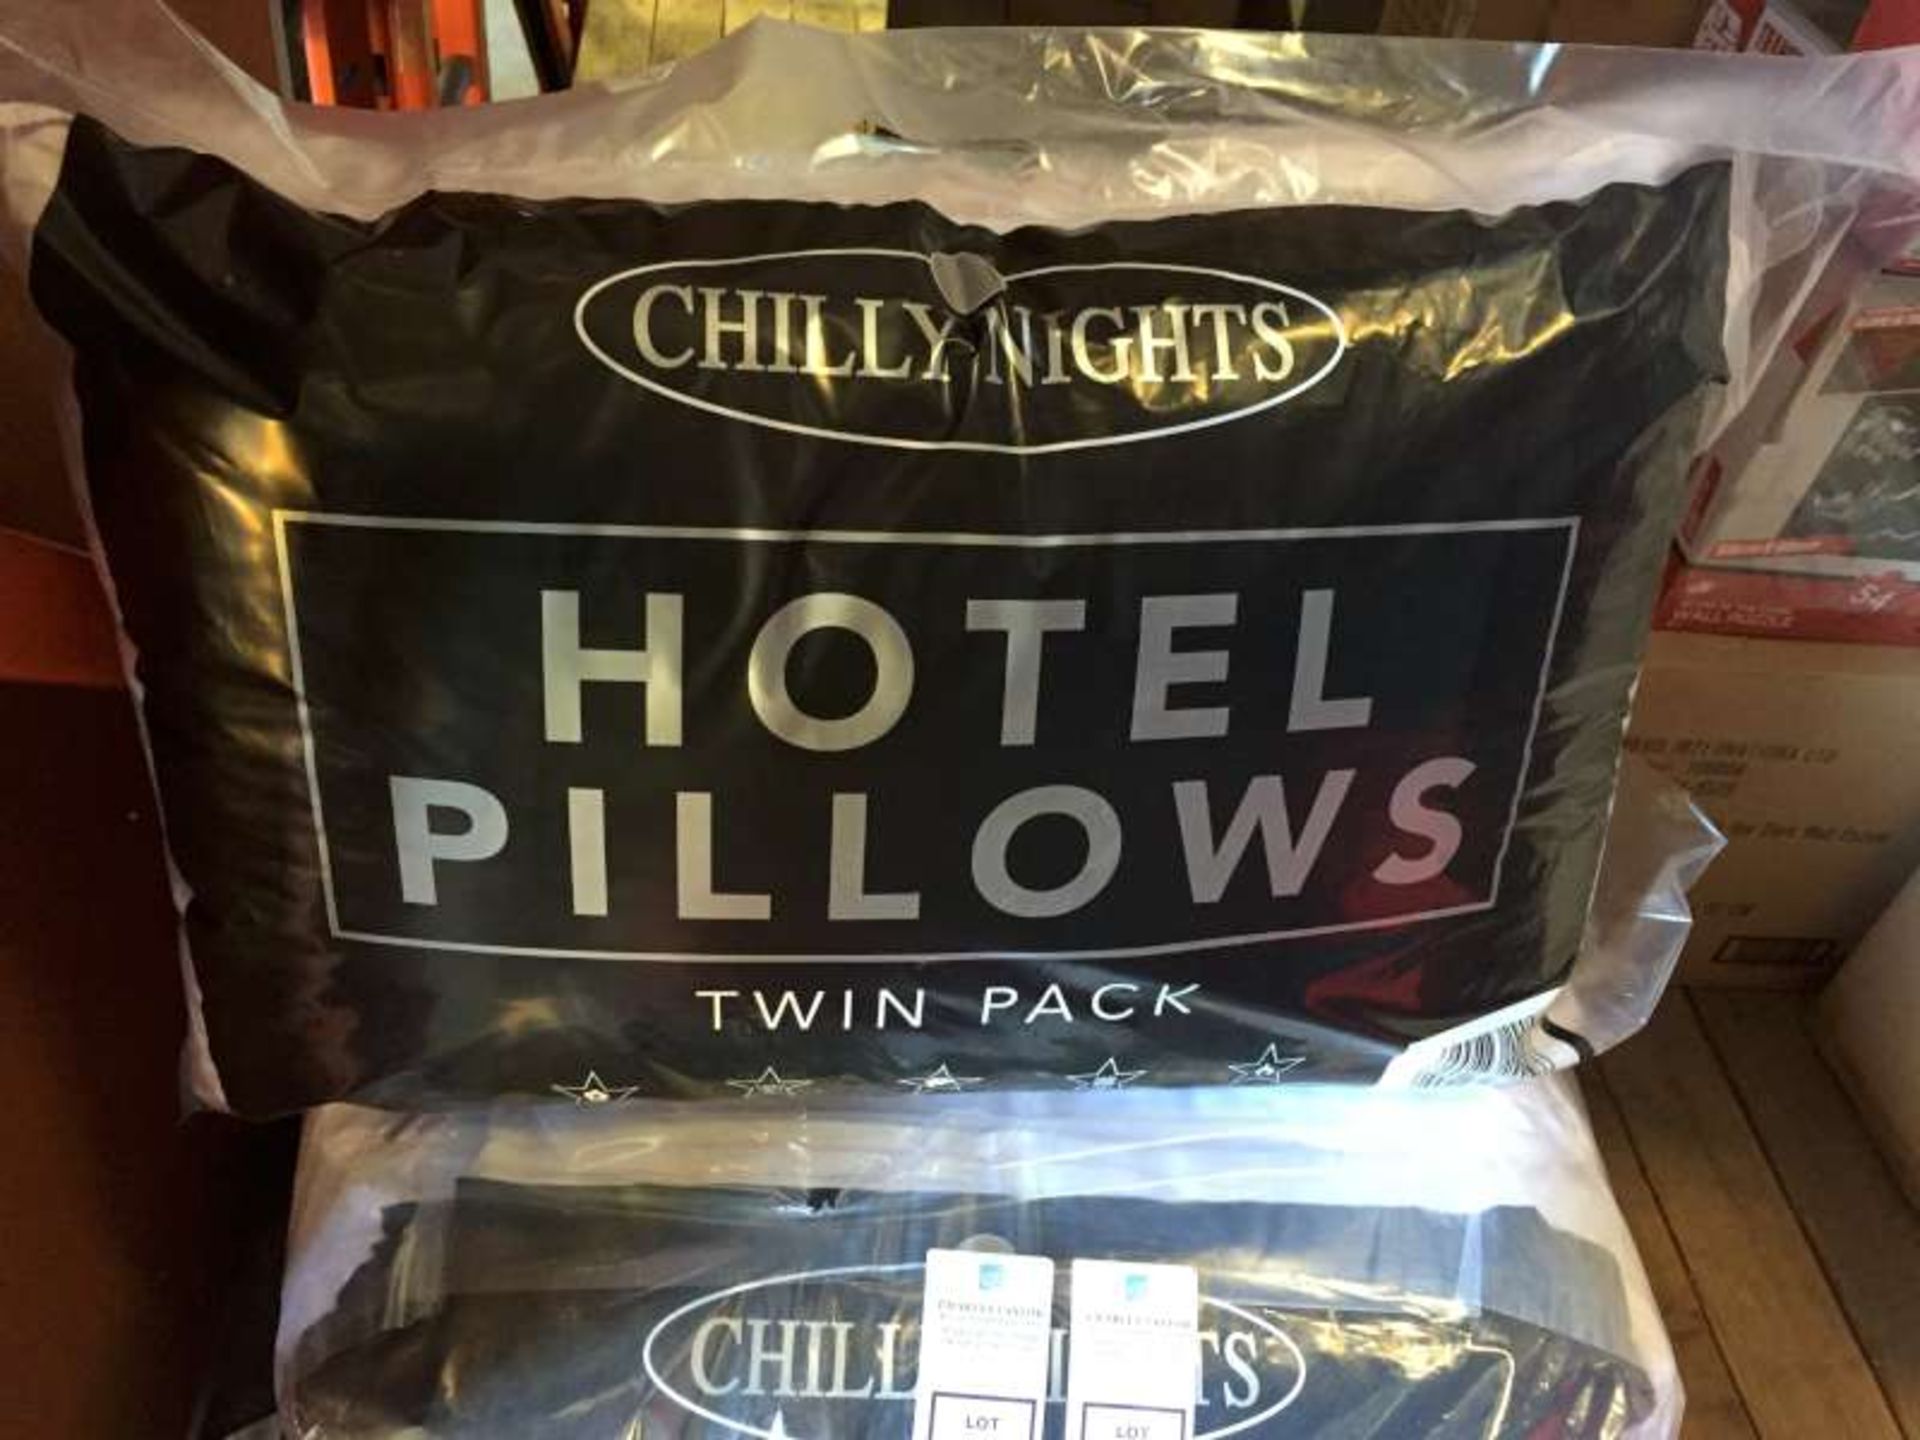 12 X BRAND NEW CHILLY NIGHTS PILLOWS IN 1 BAG